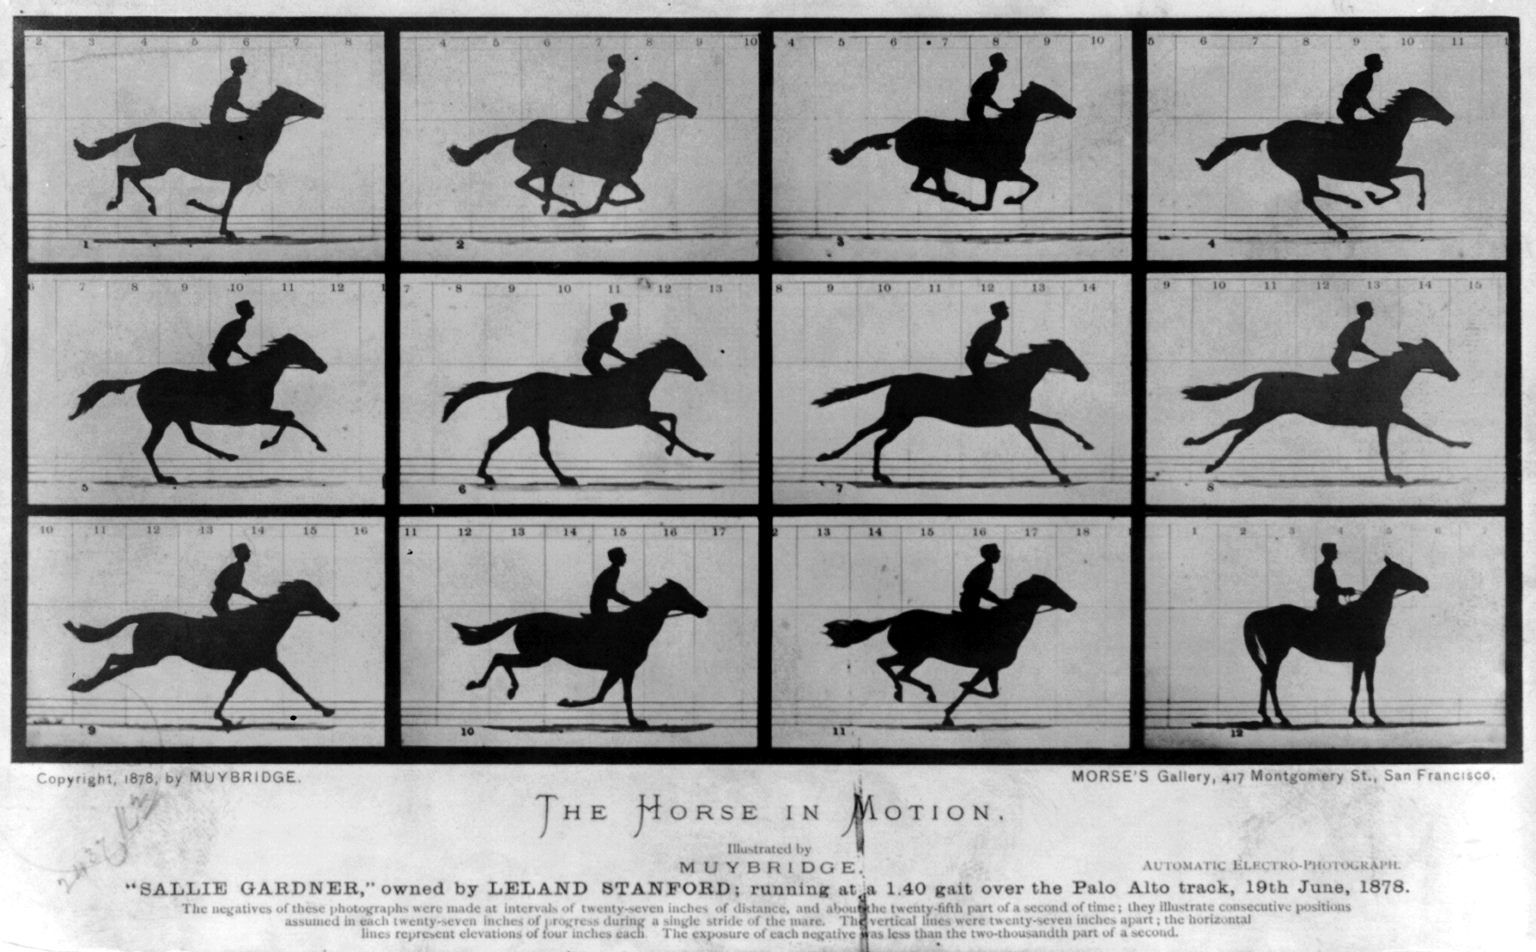 The Horse in motion. 'Sallie Gardner,' owned by Leland Stanford; running at a 1:40 gait over the Palo Alto track, 19th June 1878